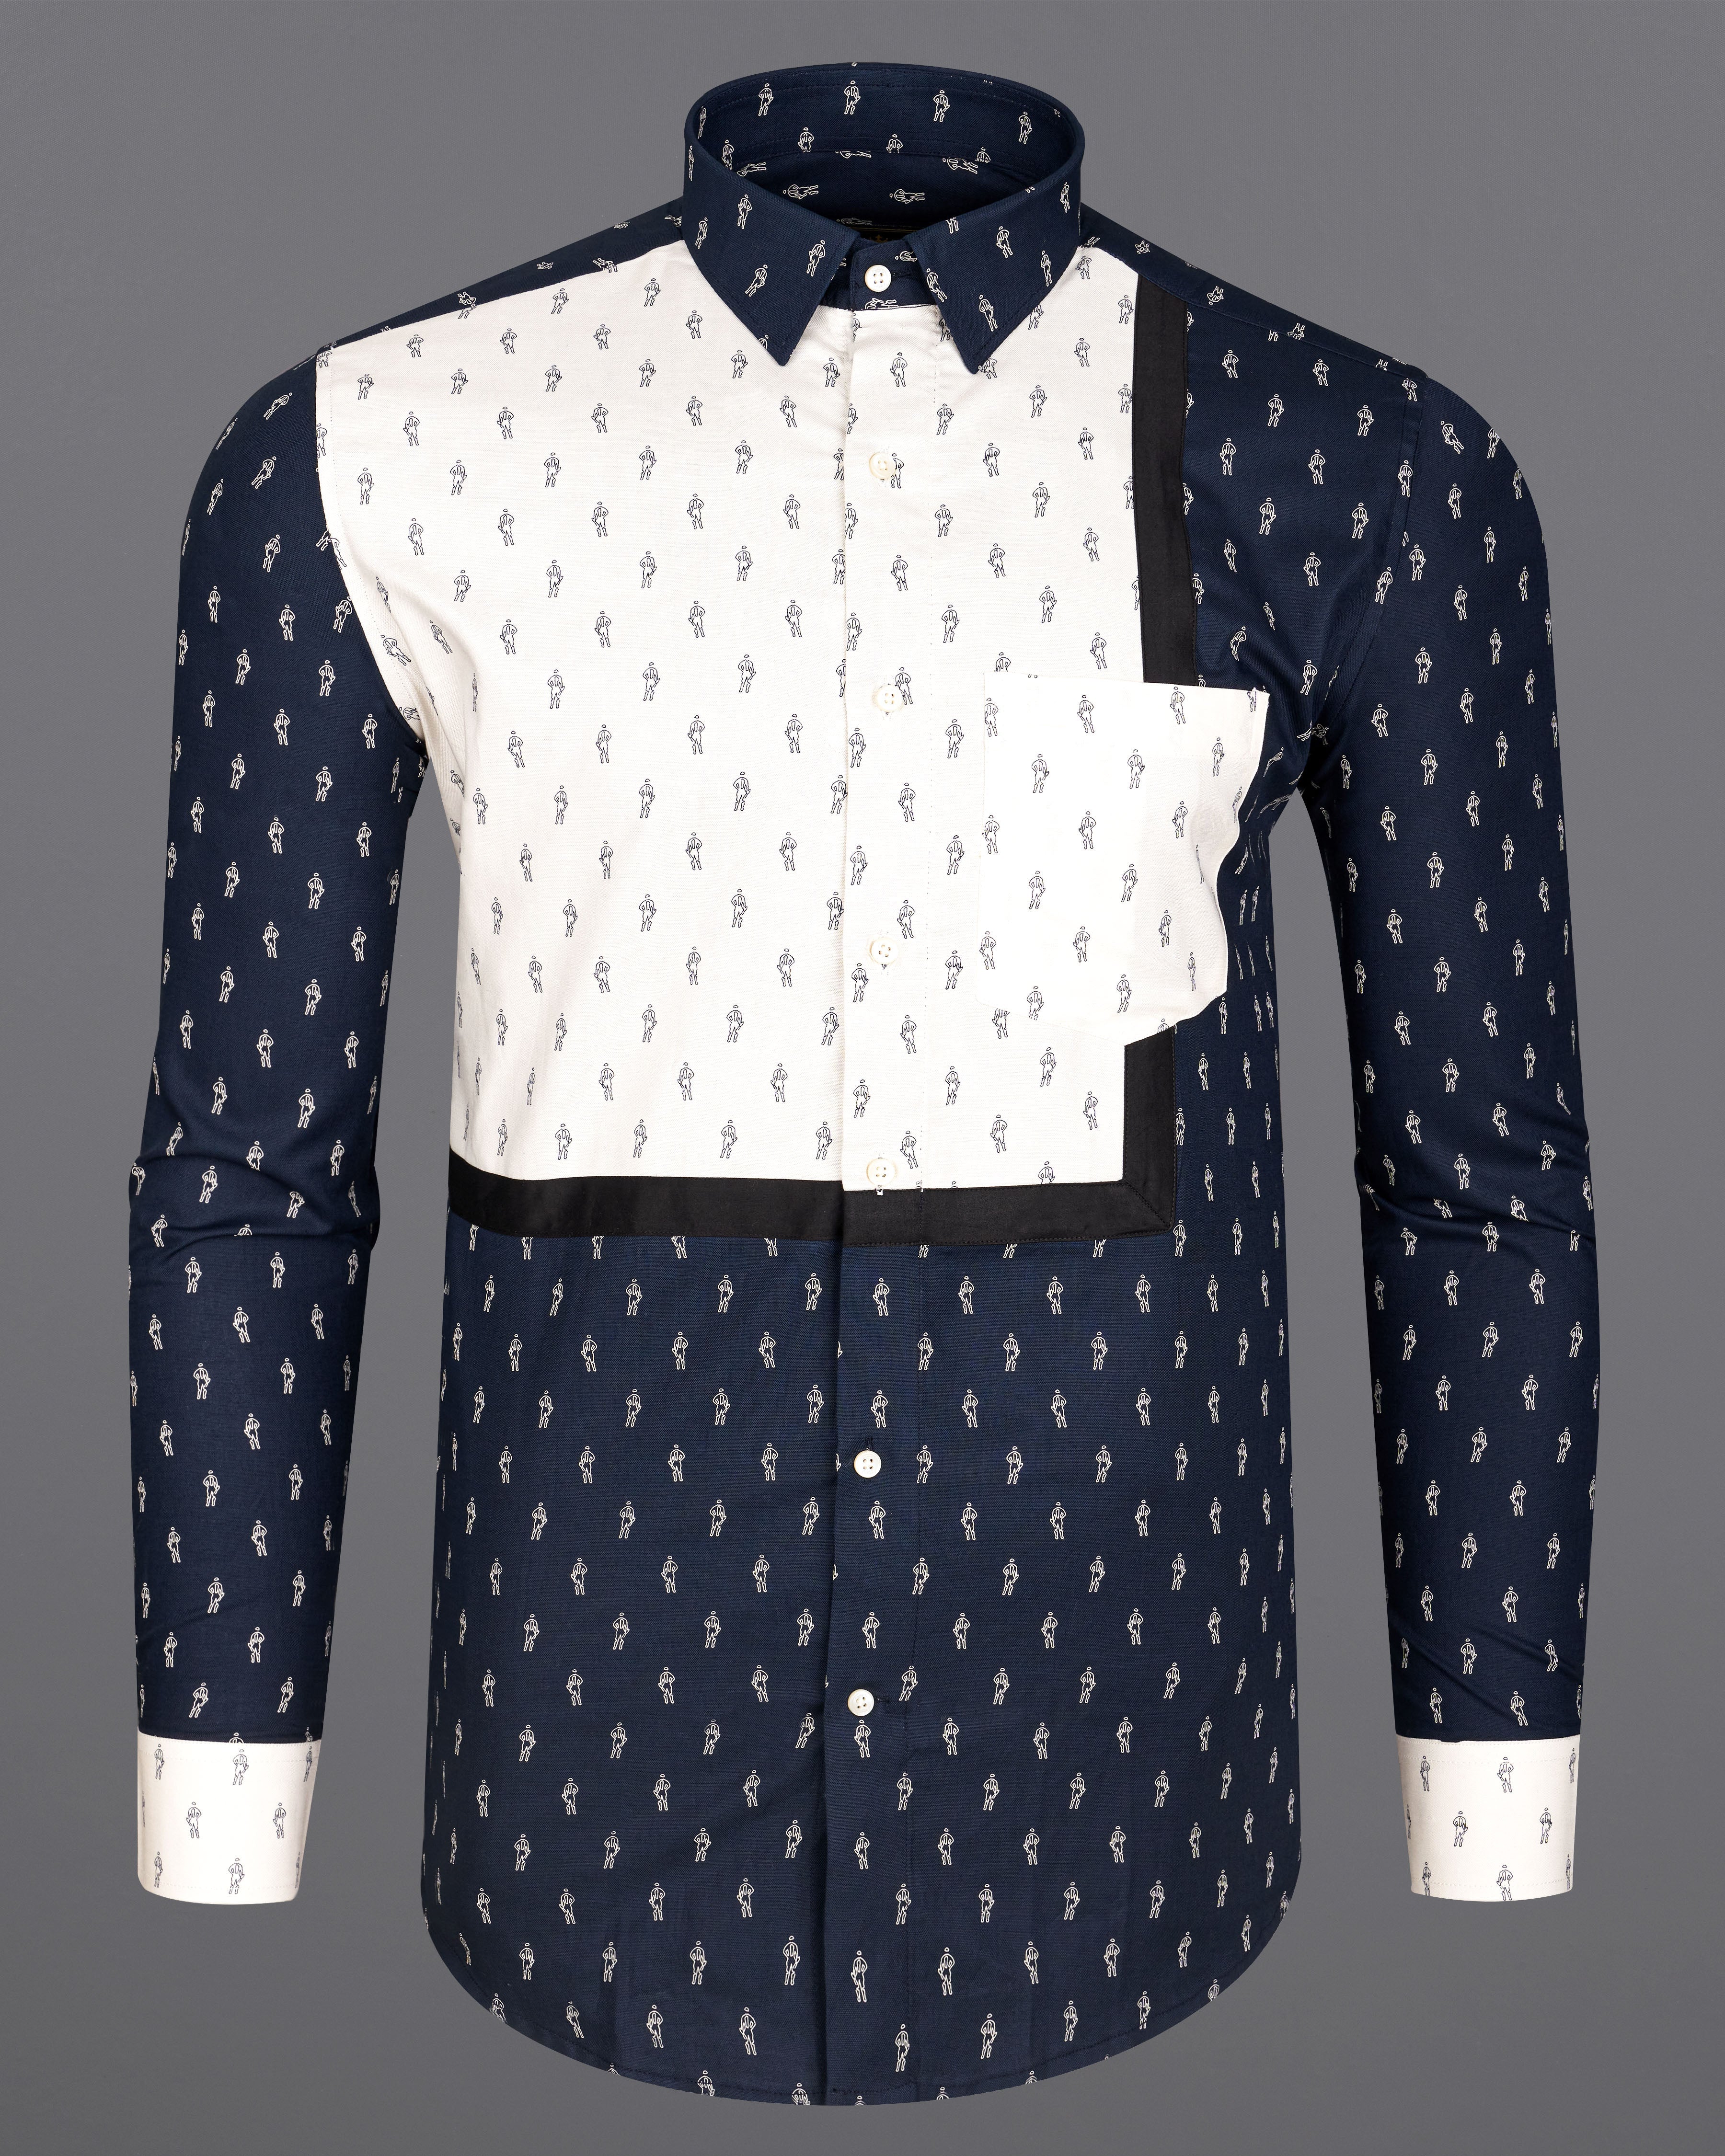 Firefly Blue with White Printed Royal Oxford Designer Shirt  8662-P415-38,8662-P415-H-38,8662-P415-39,8662-P415-H-39,8662-P415-40,8662-P415-H-40,8662-P415-42,8662-P415-H-42,8662-P415-44,8662-P415-H-44,8662-P415-46,8662-P415-H-46,8662-P415-48,8662-P415-H-48,8662-P415-50,8662-P415-H-50,8662-P415-52,8662-P415-H-52